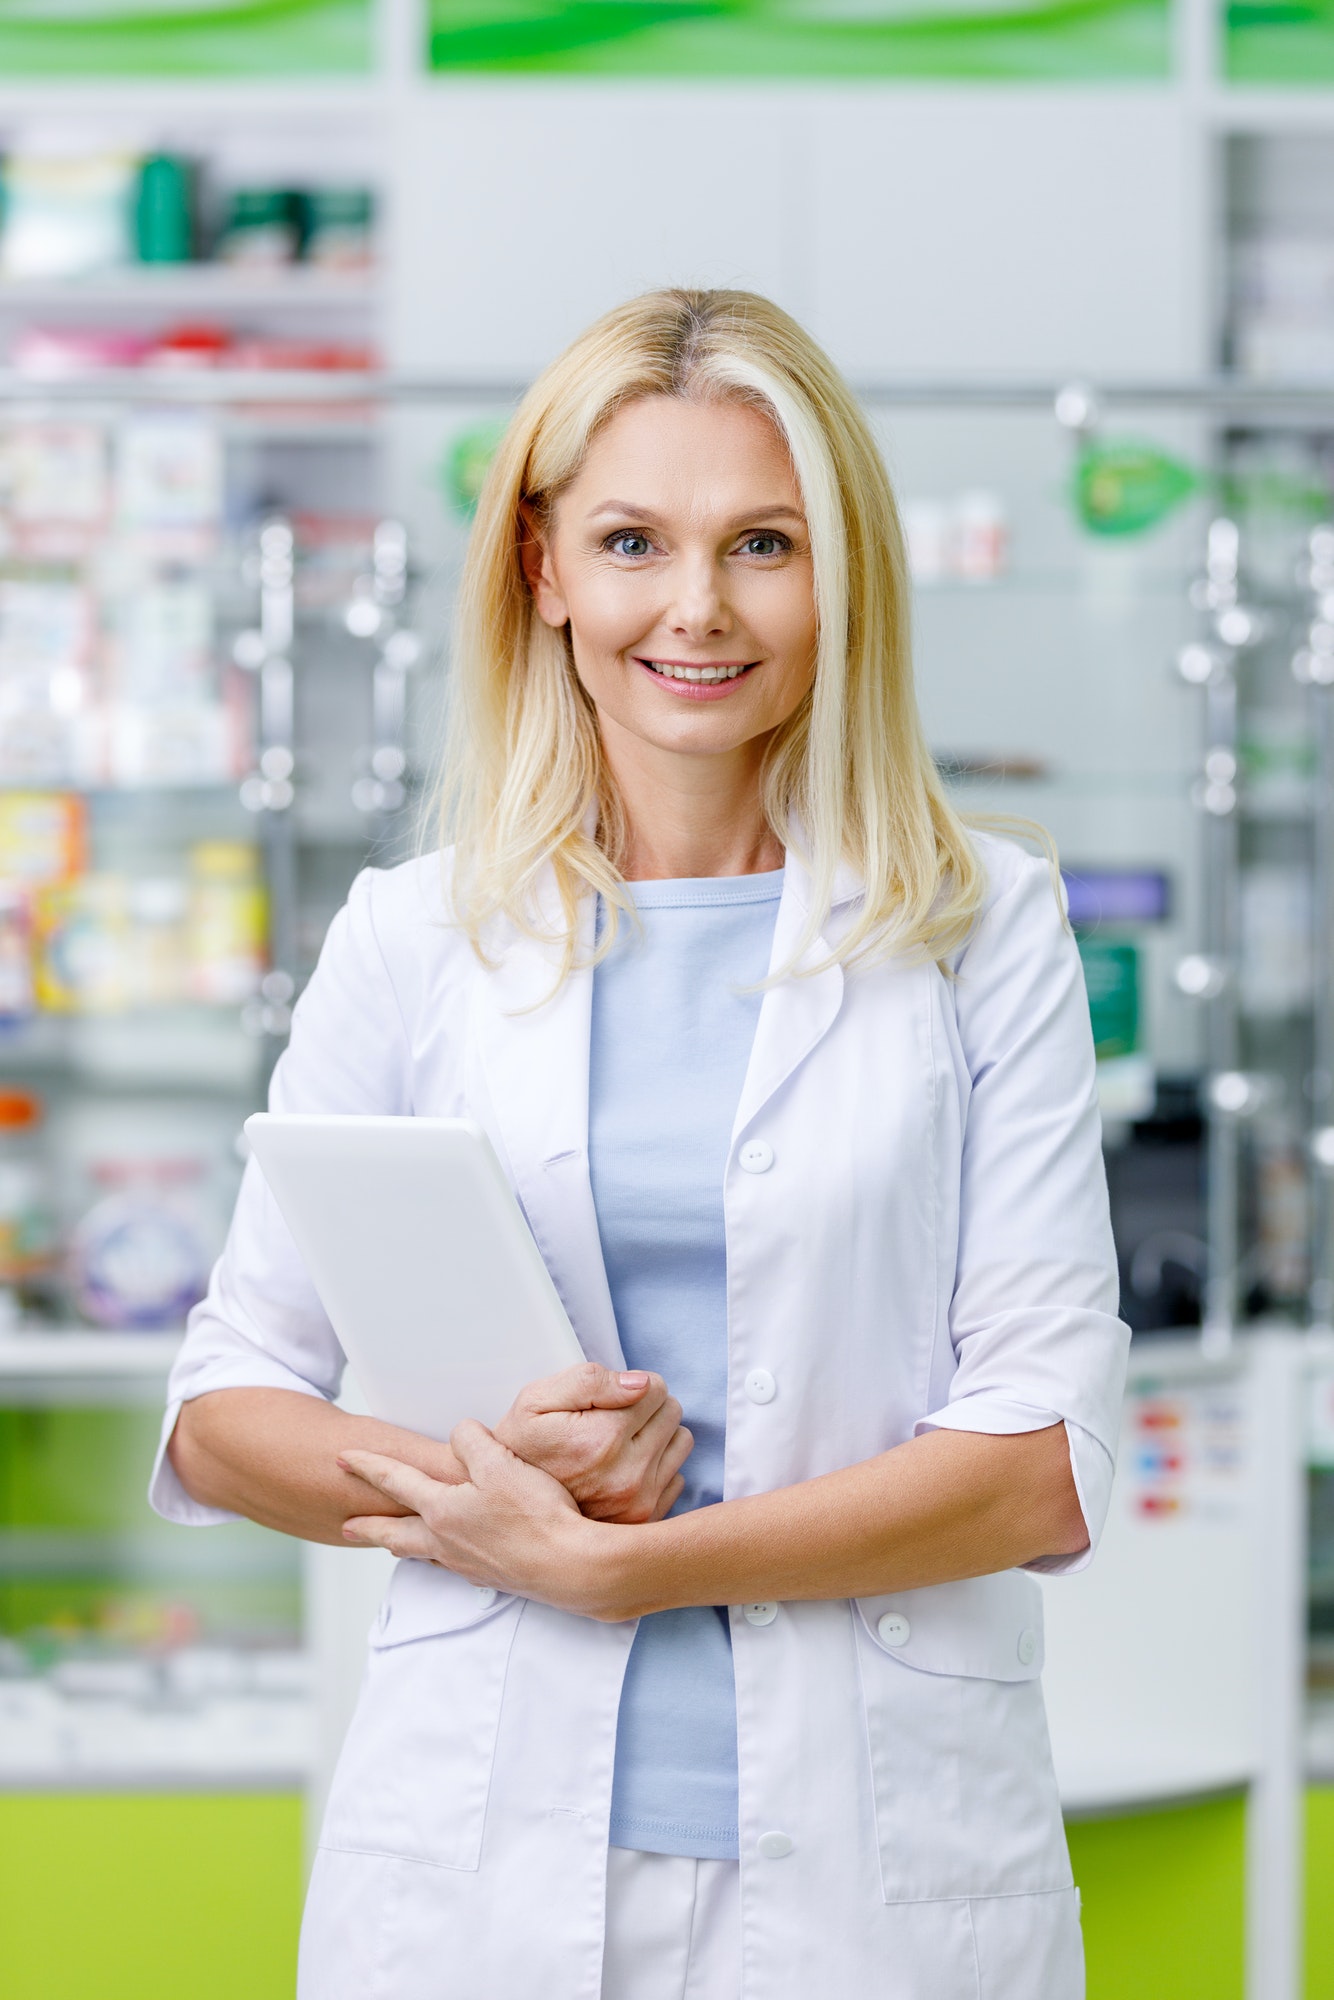 female pharmacist in white coat holding digital tablet and smiling at camera